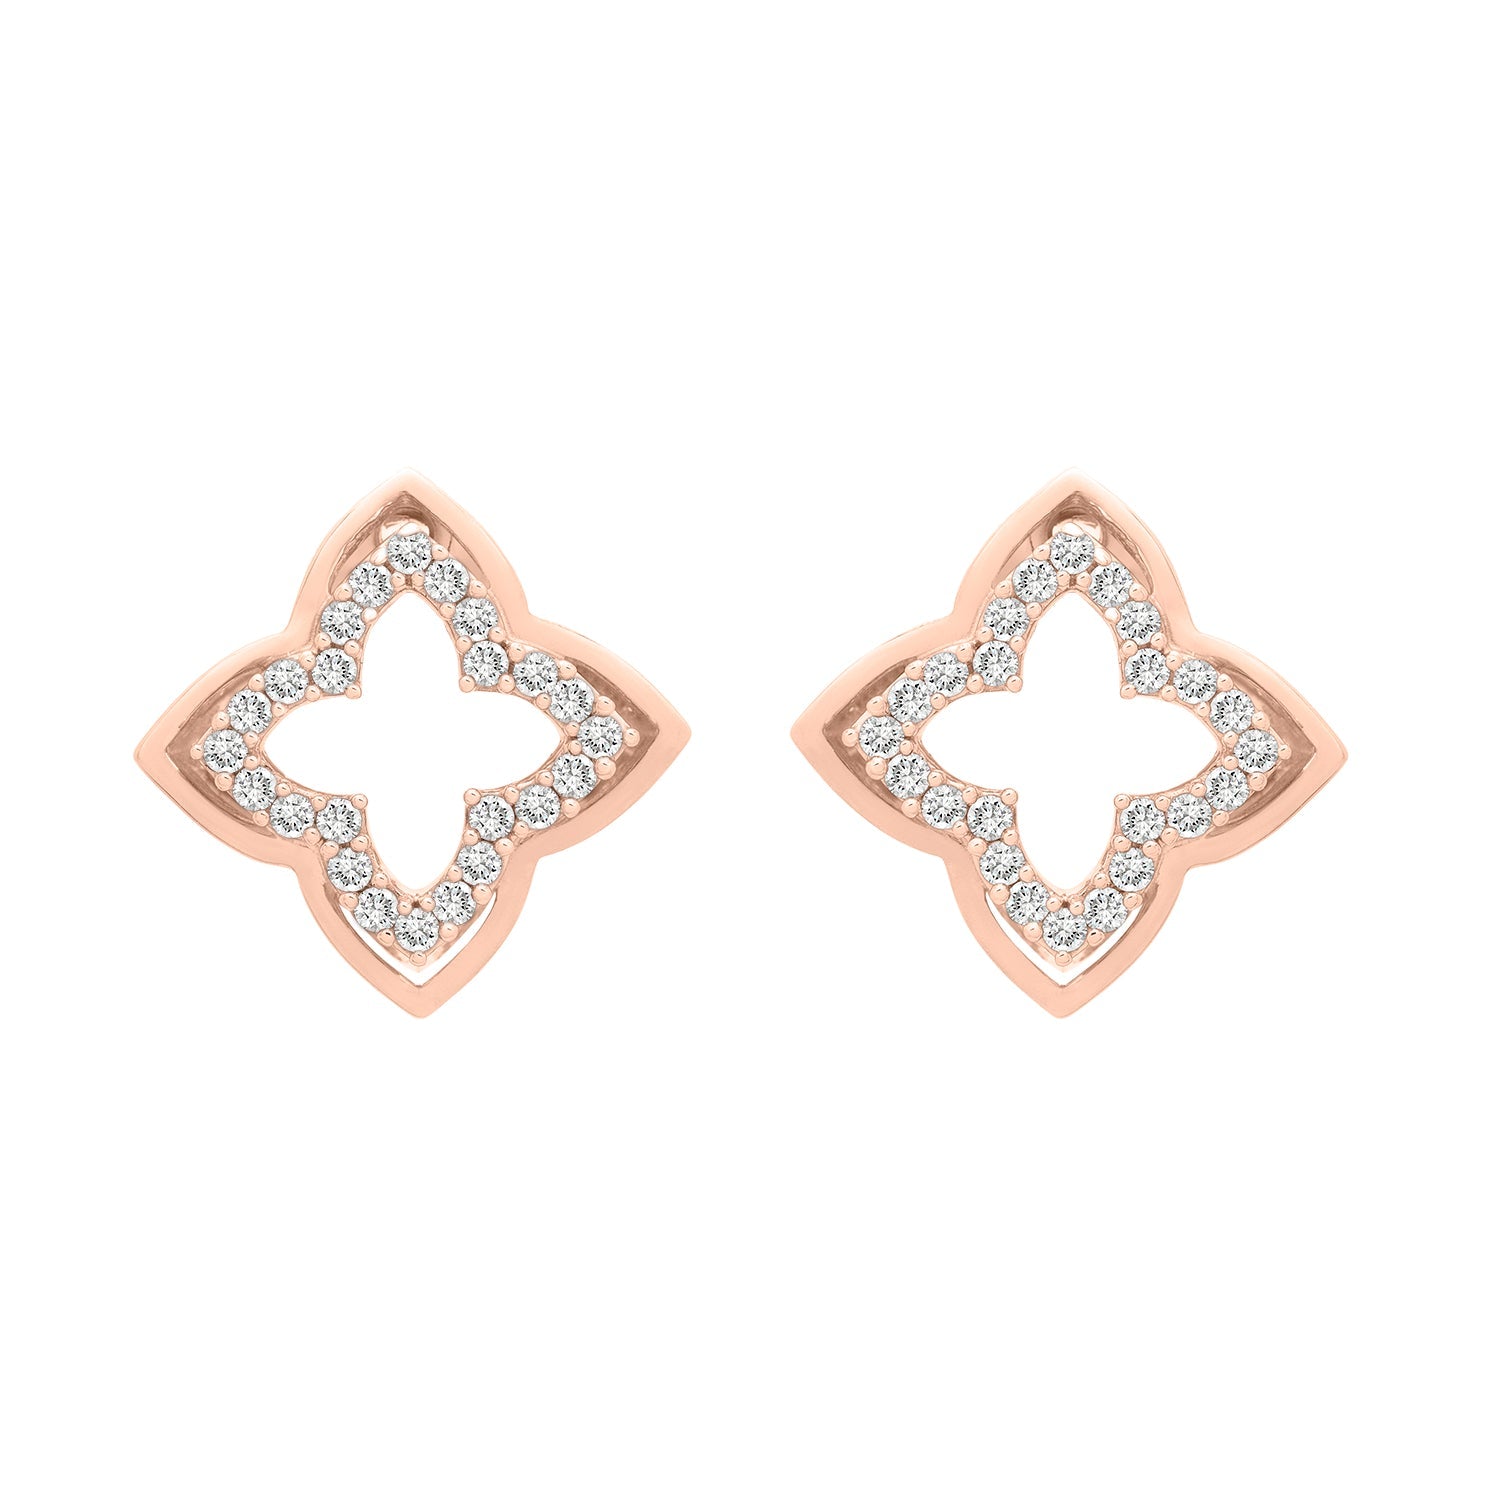 Eti Open Clover Stud Earrings in Rose Gold With front View